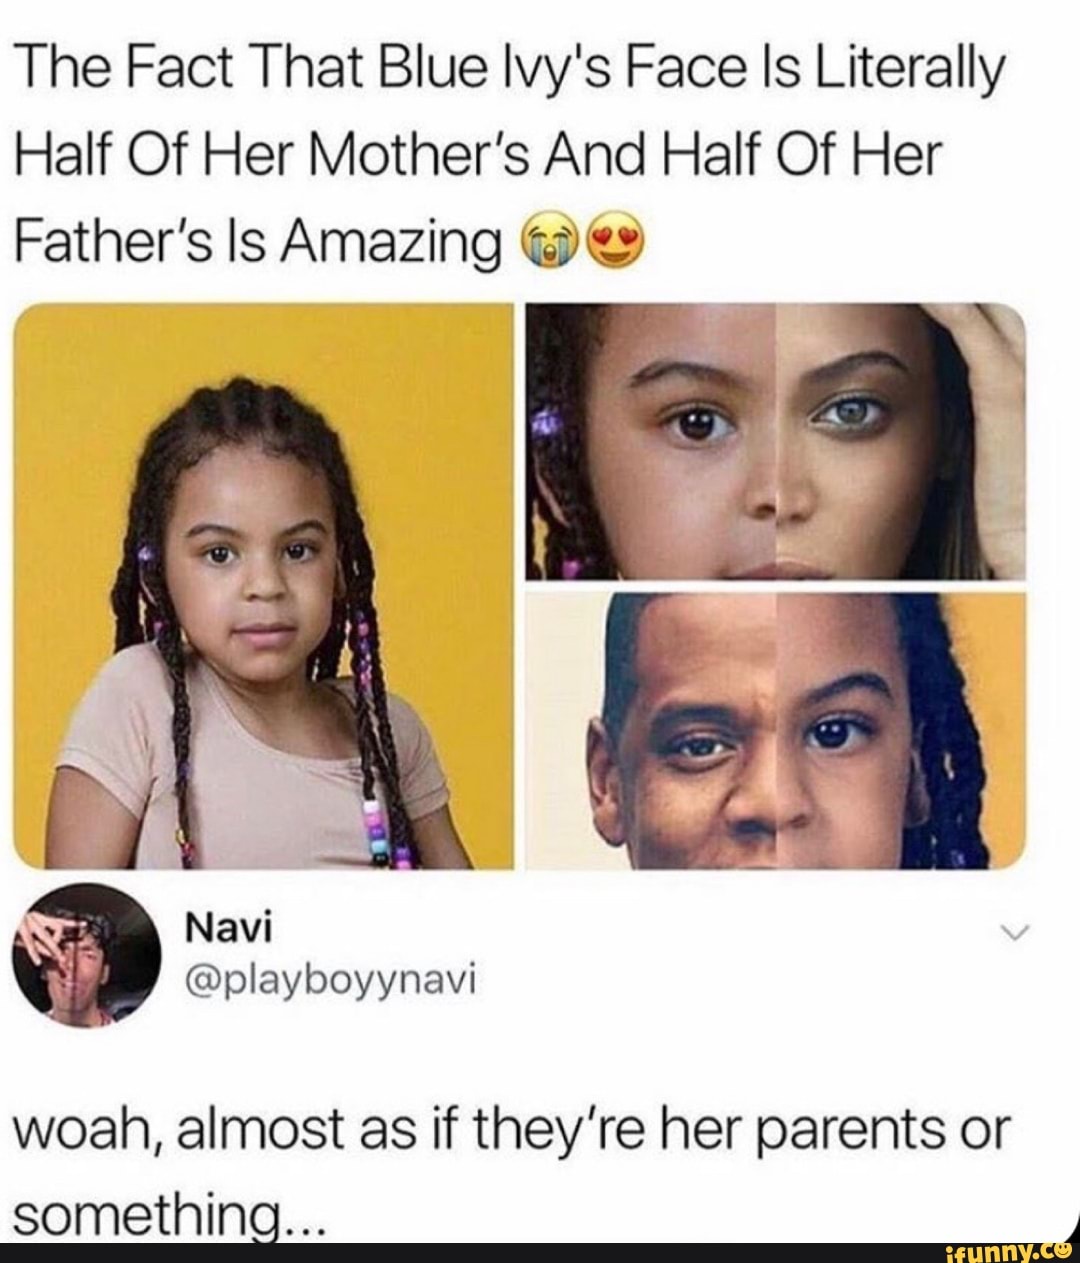 The Fact That Blue Ivy's Face Is Literally Half Of Her Mother's And ...